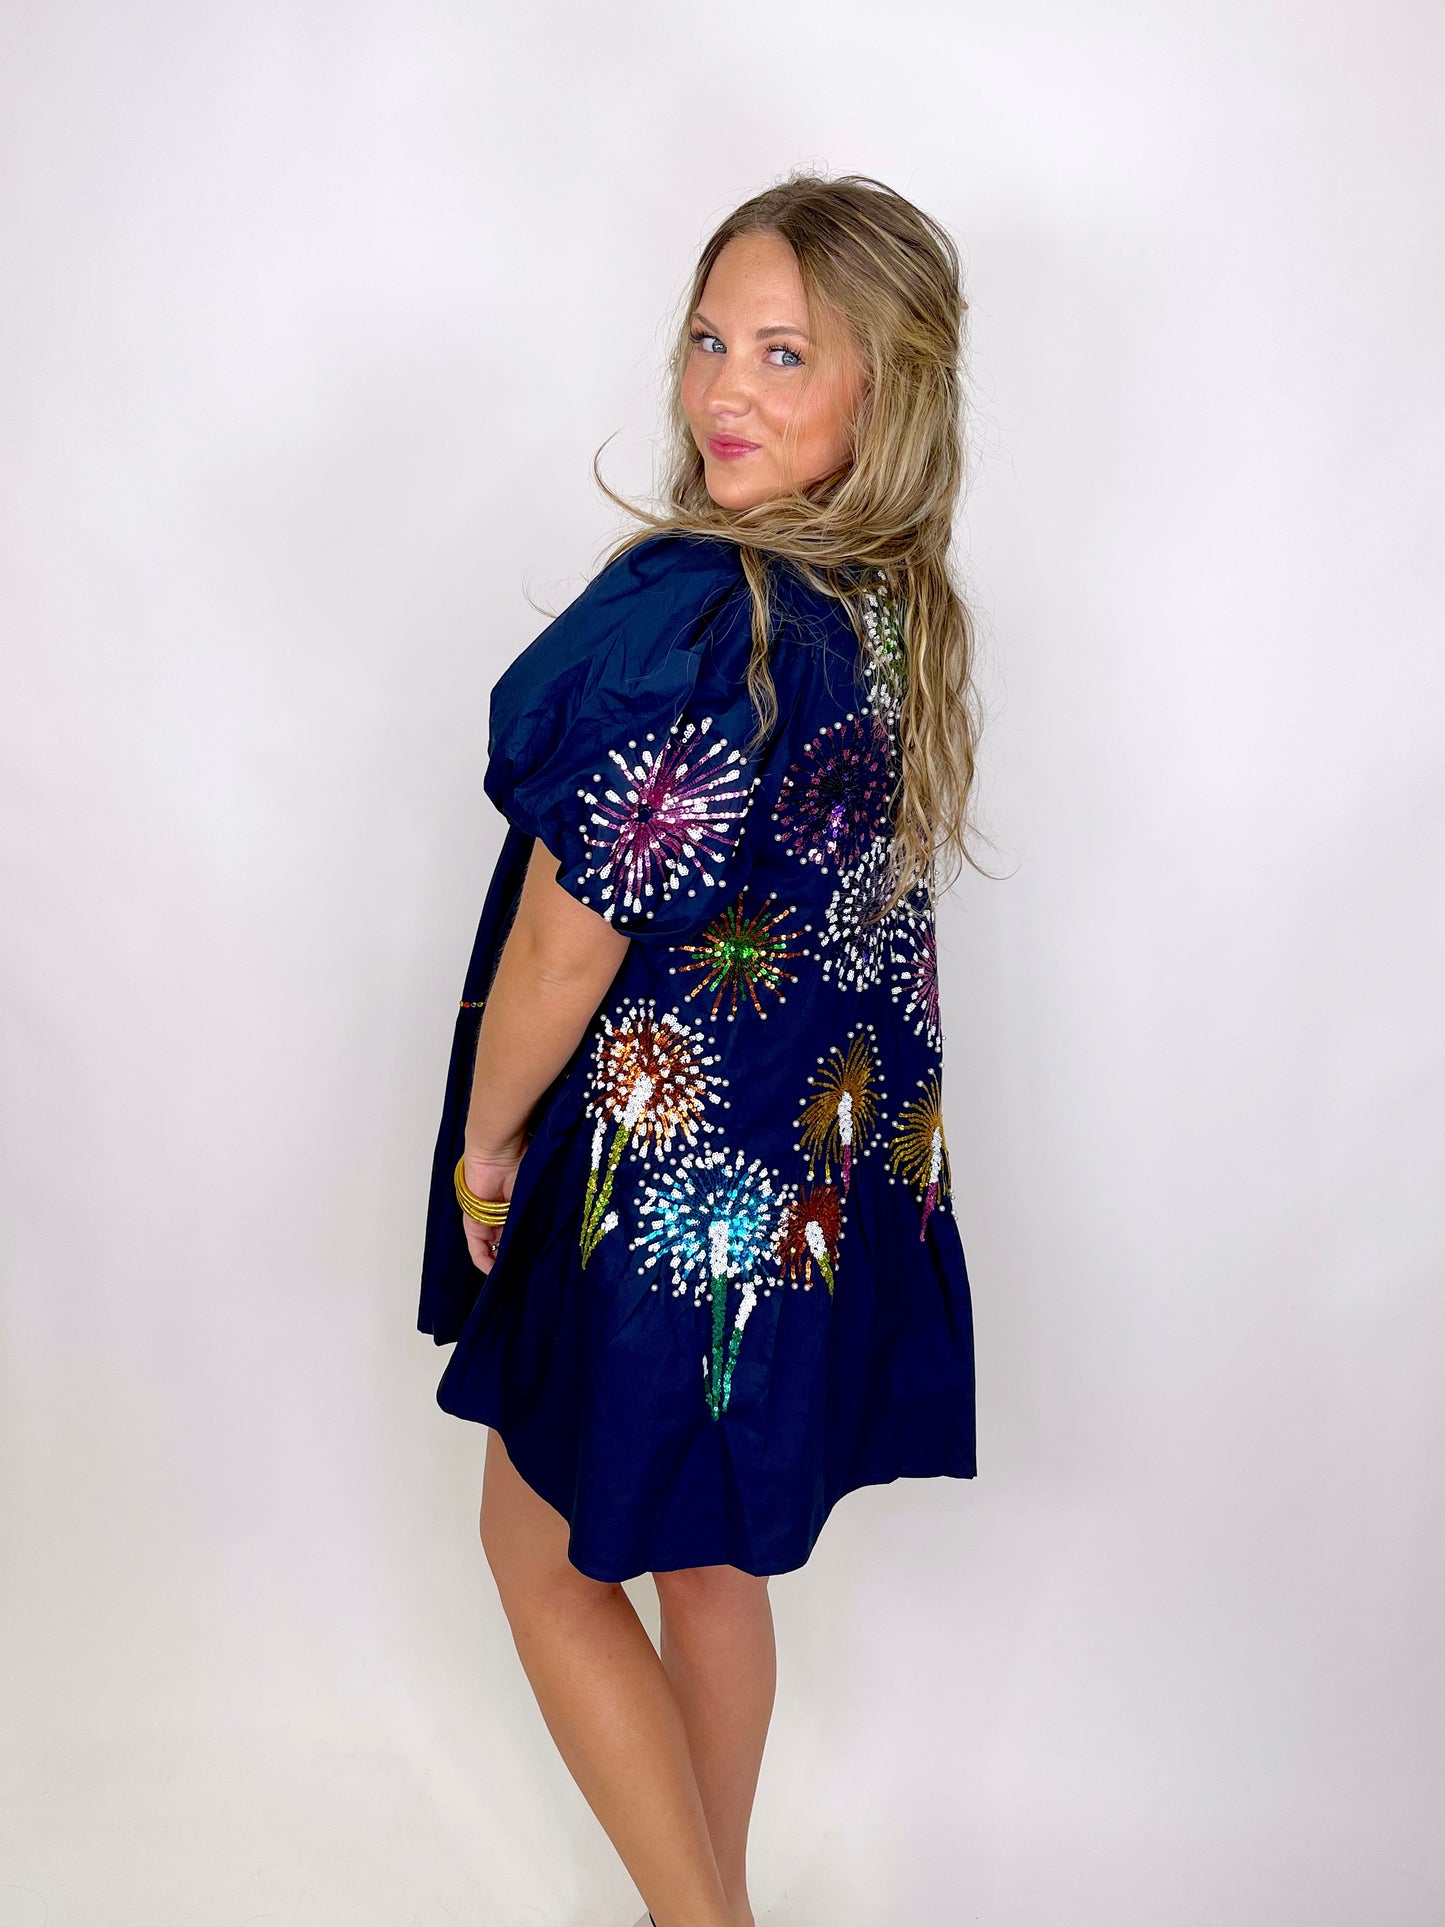 Firework Dress | Queen of Sparkles-Mini Dress-Queen of Sparkles-The Village Shoppe, Women’s Fashion Boutique, Shop Online and In Store - Located in Muscle Shoals, AL.